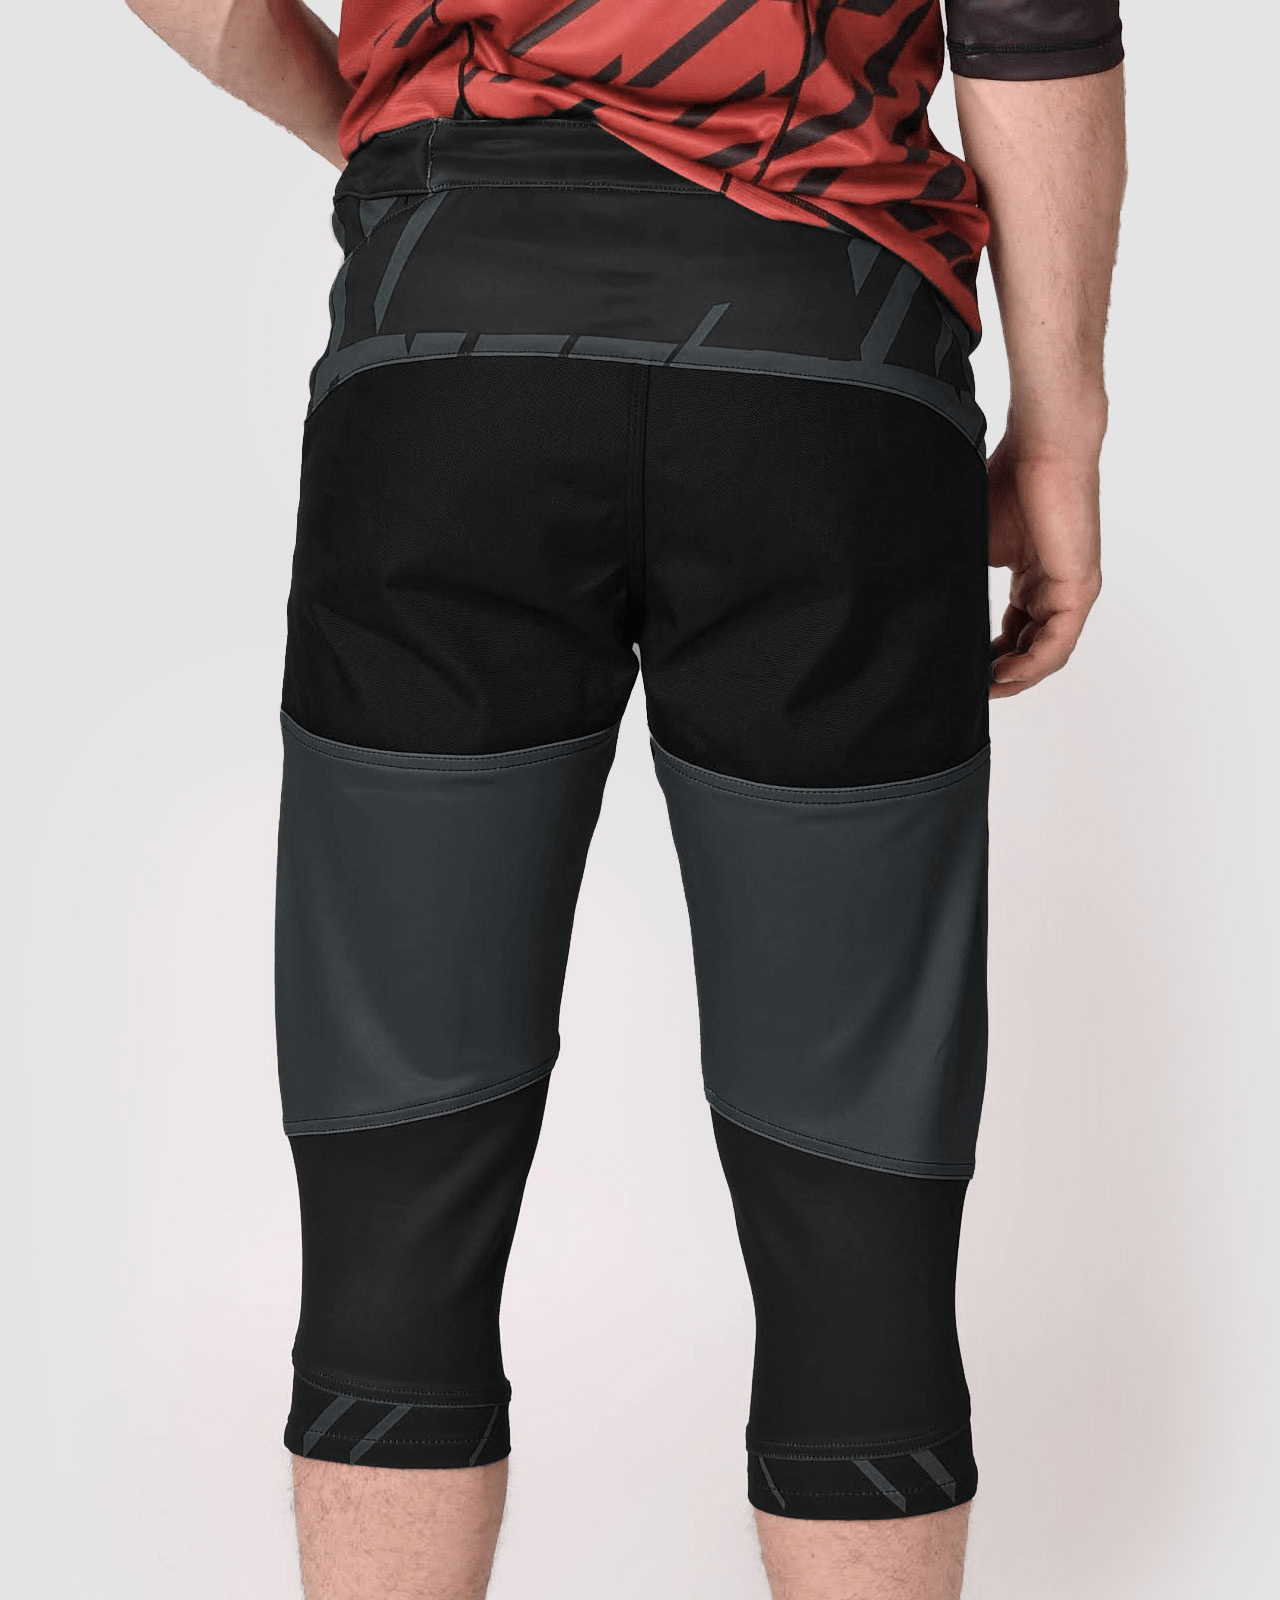 Manufactory Apparel Physical product Electrix Streamline Short